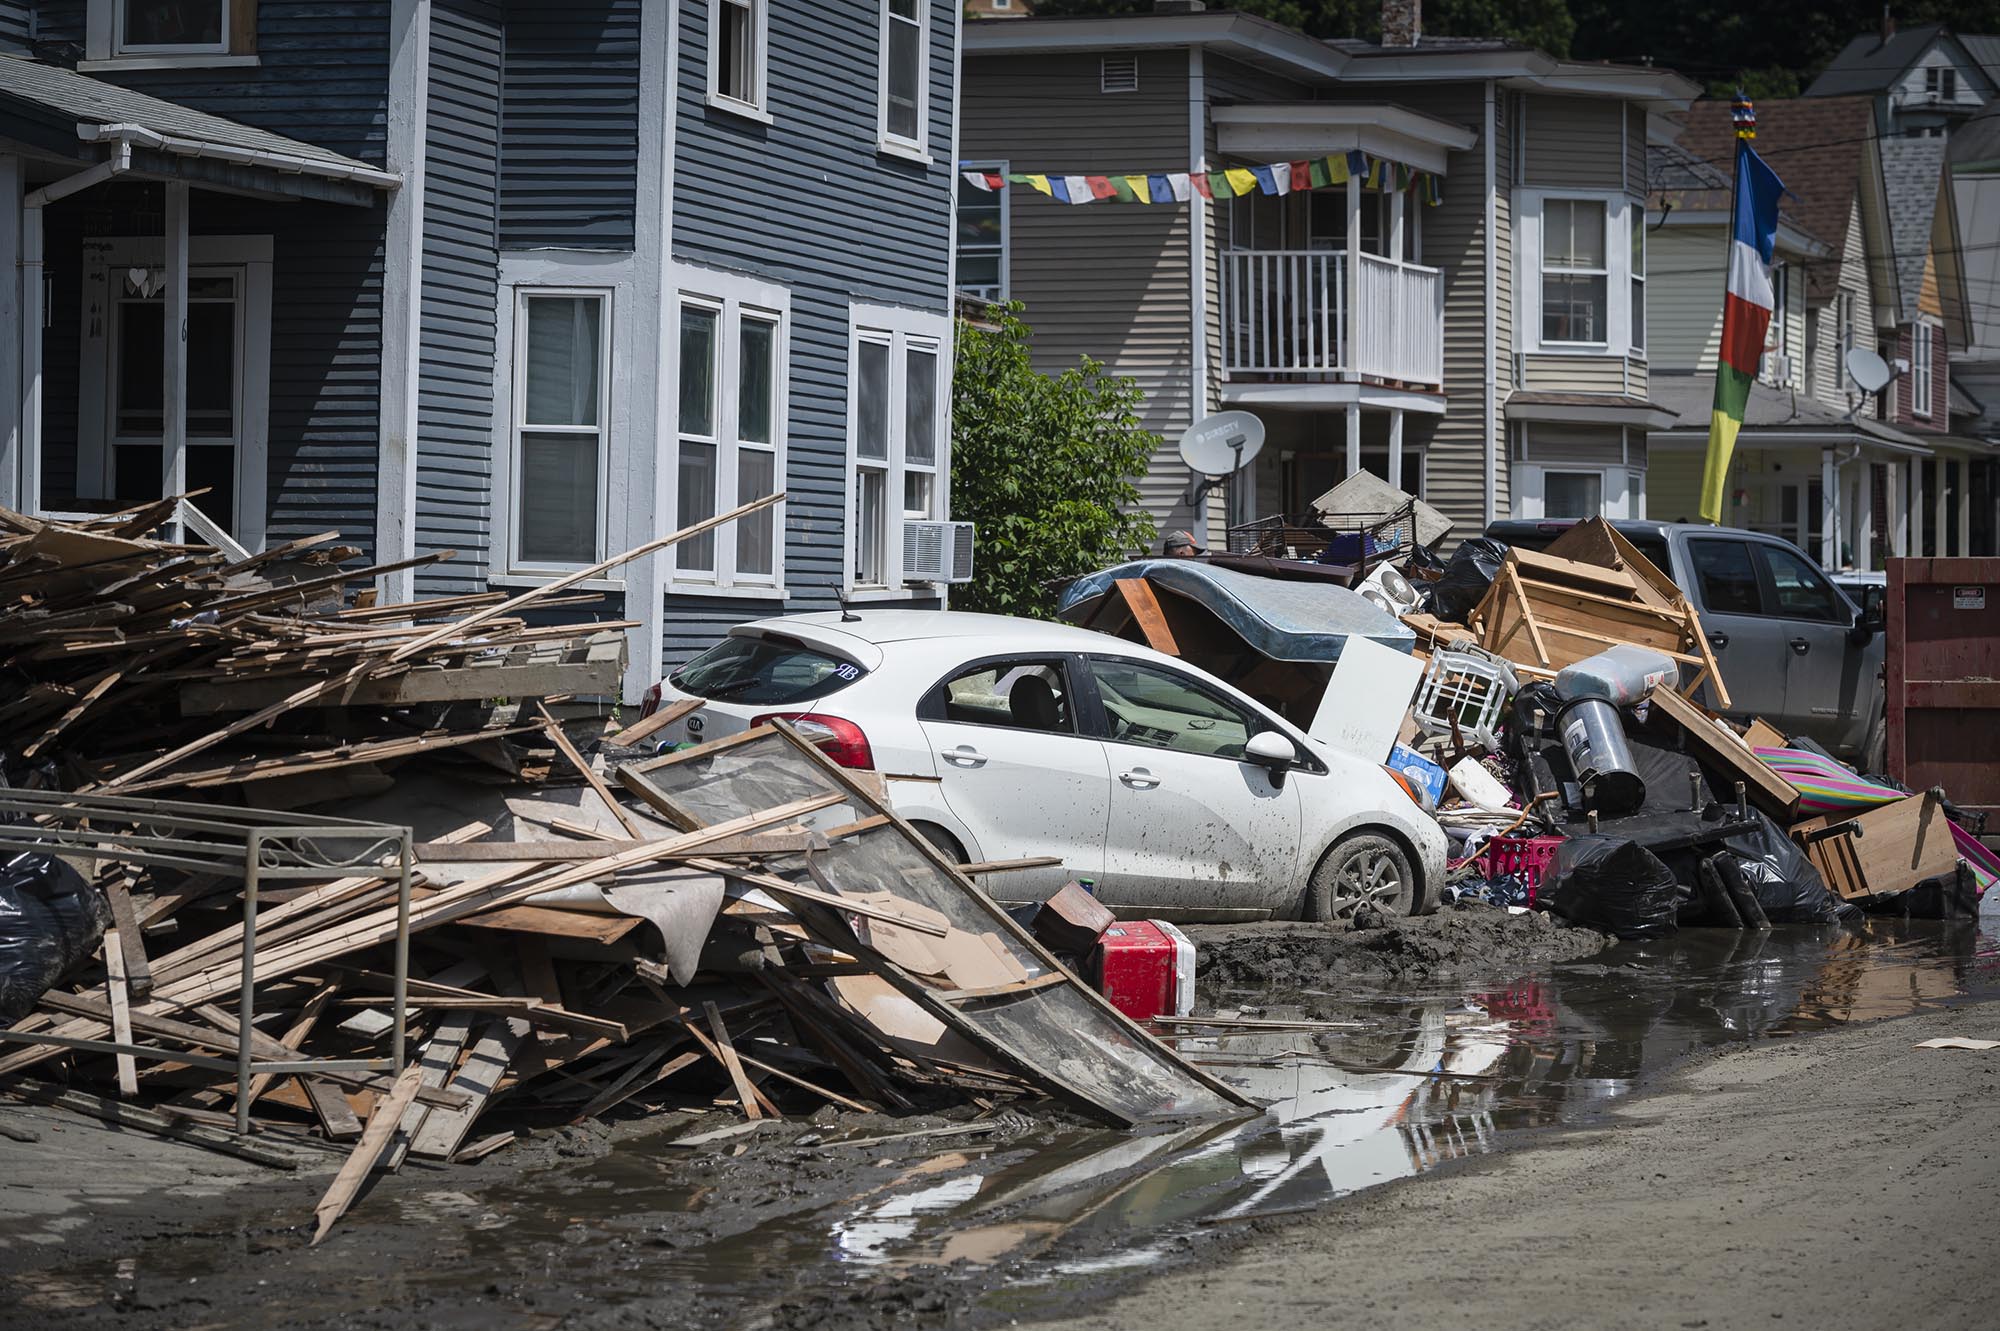 Poll: 13% of Vermonters reported flood injury to household or organization